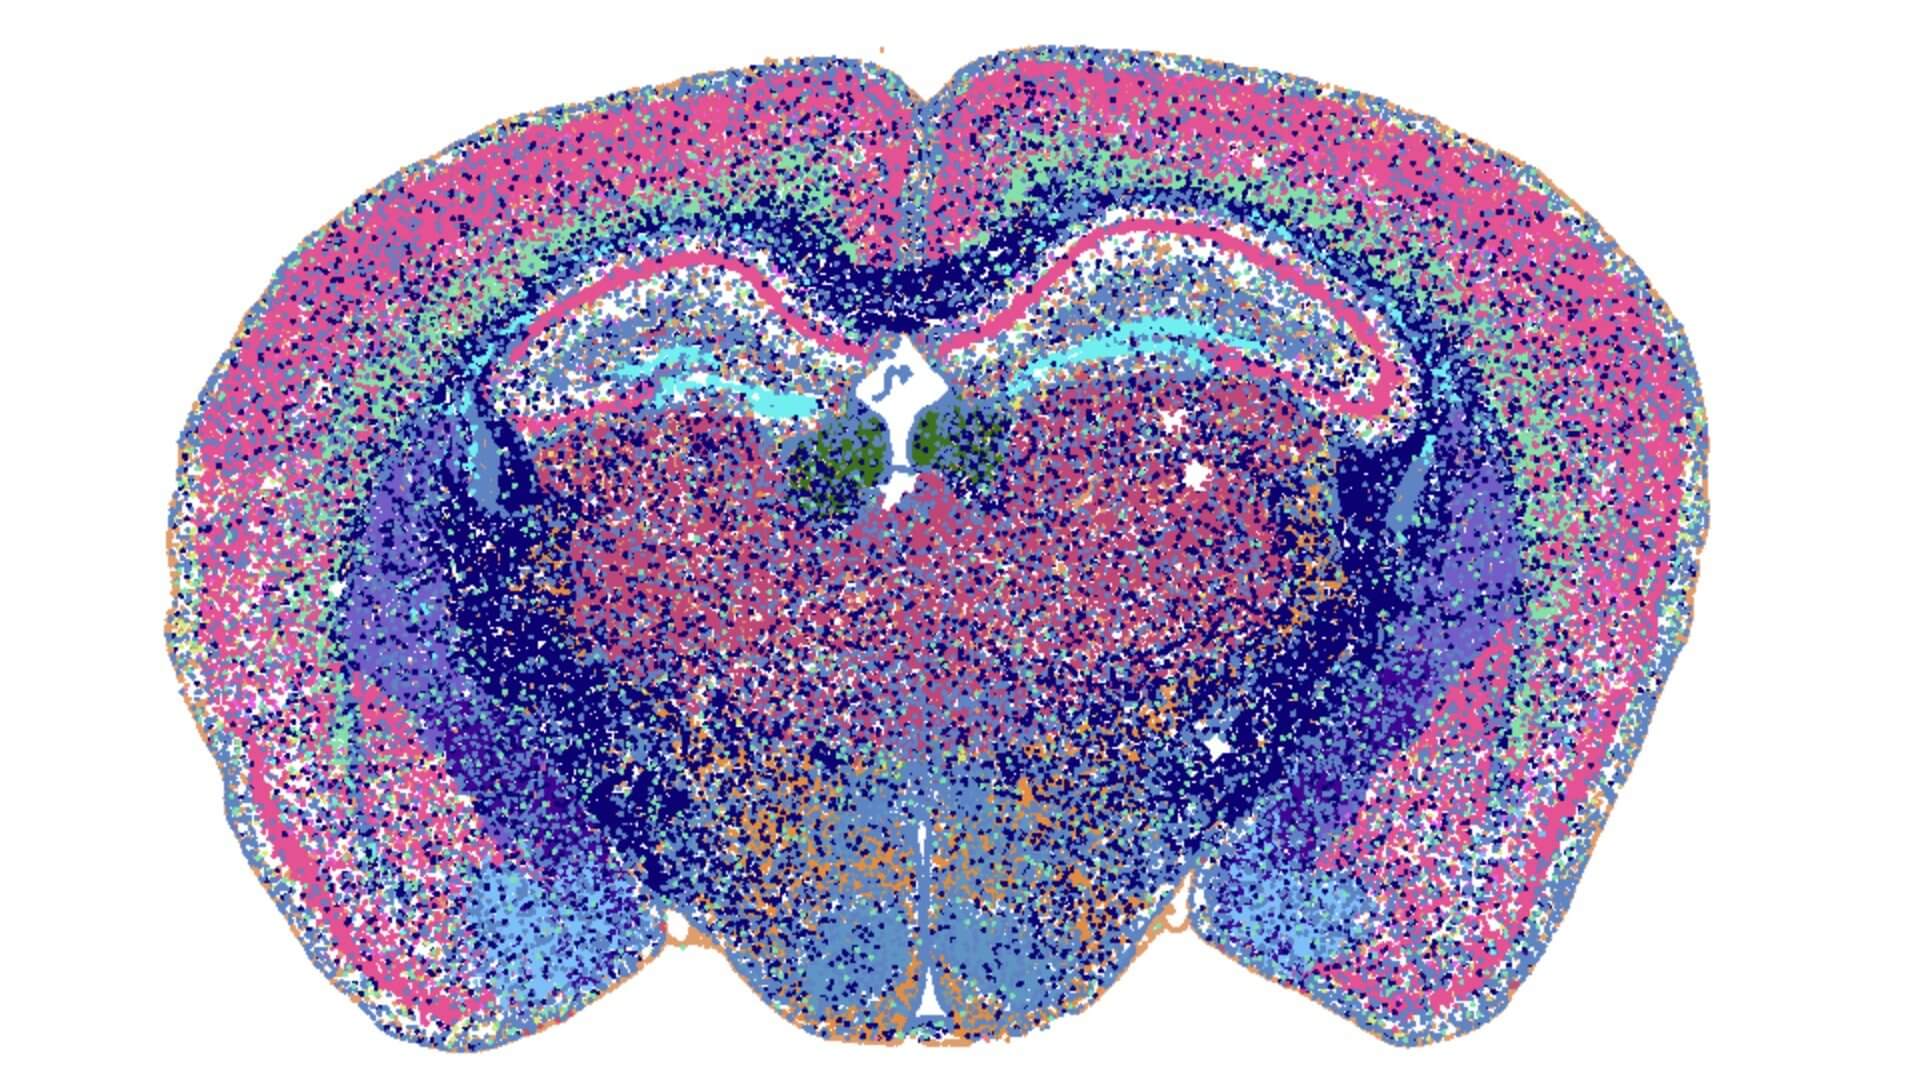 http://Whole%20mouse%20brain%20image%20showing%20spatial%20location%20of%20transcriptomic-defined%20cell%20types